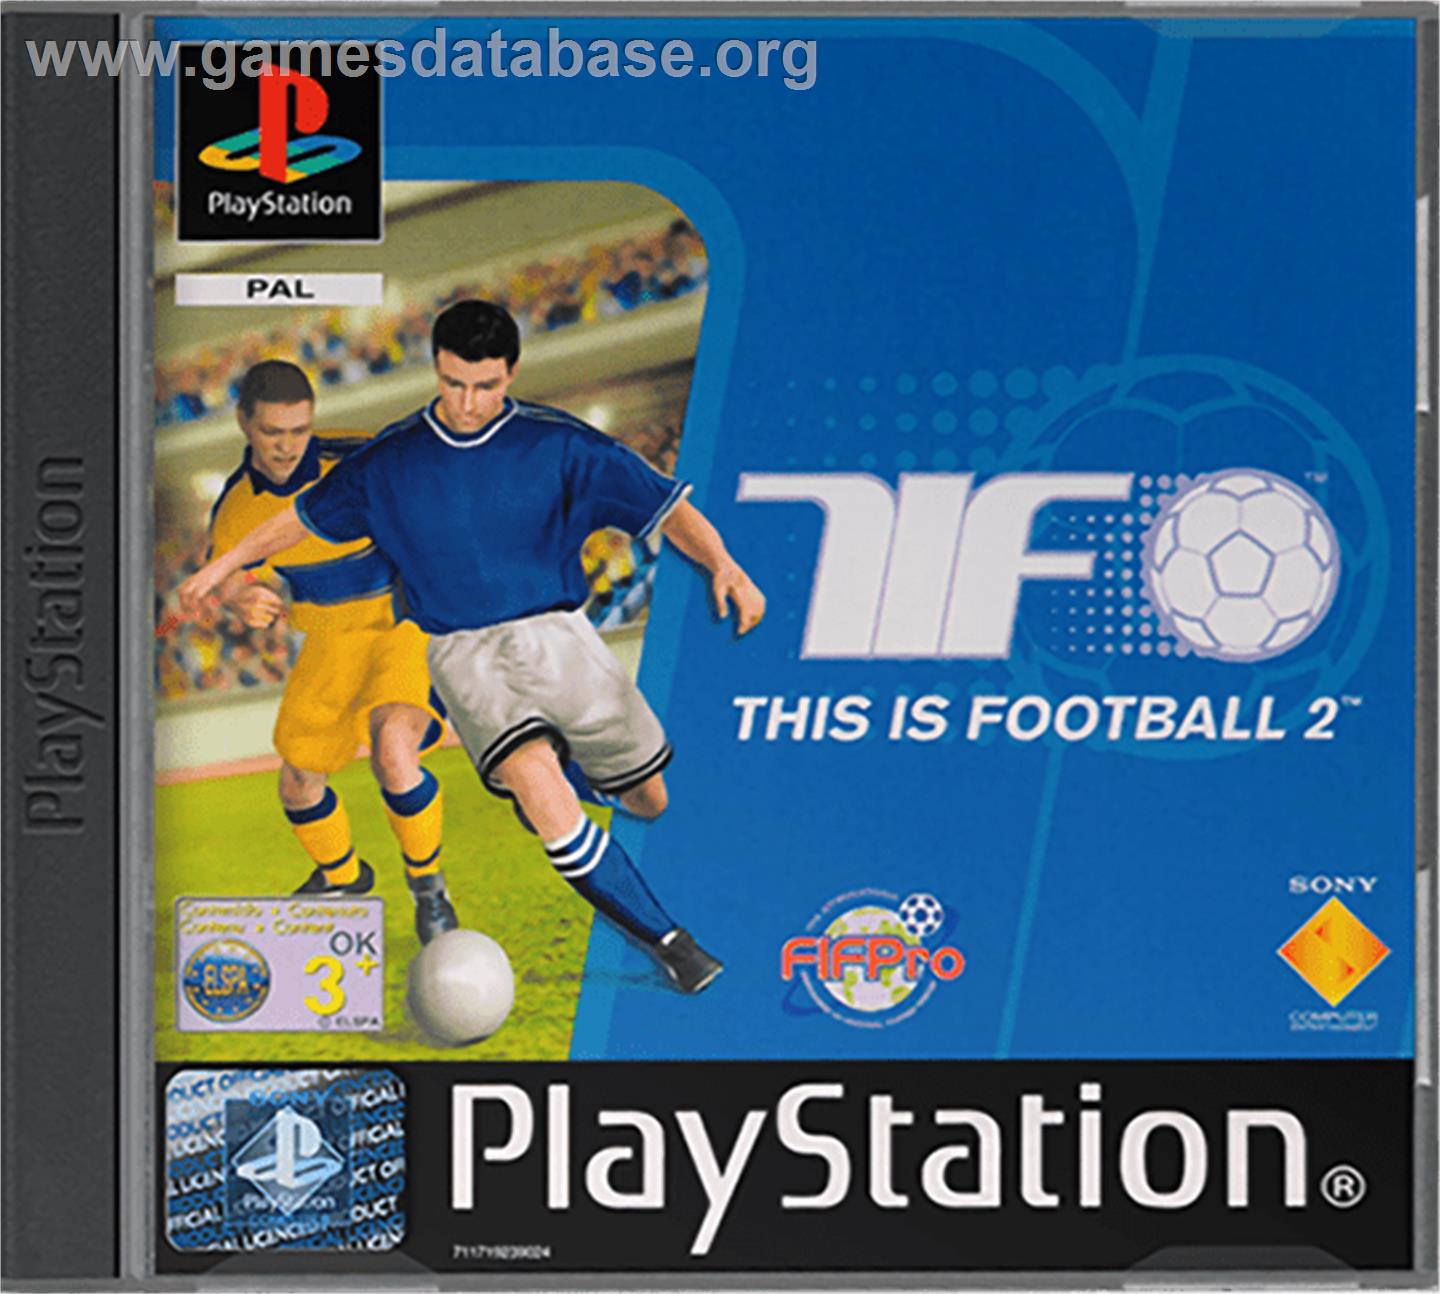 This is Football 2 - Sony Playstation - Artwork - Box